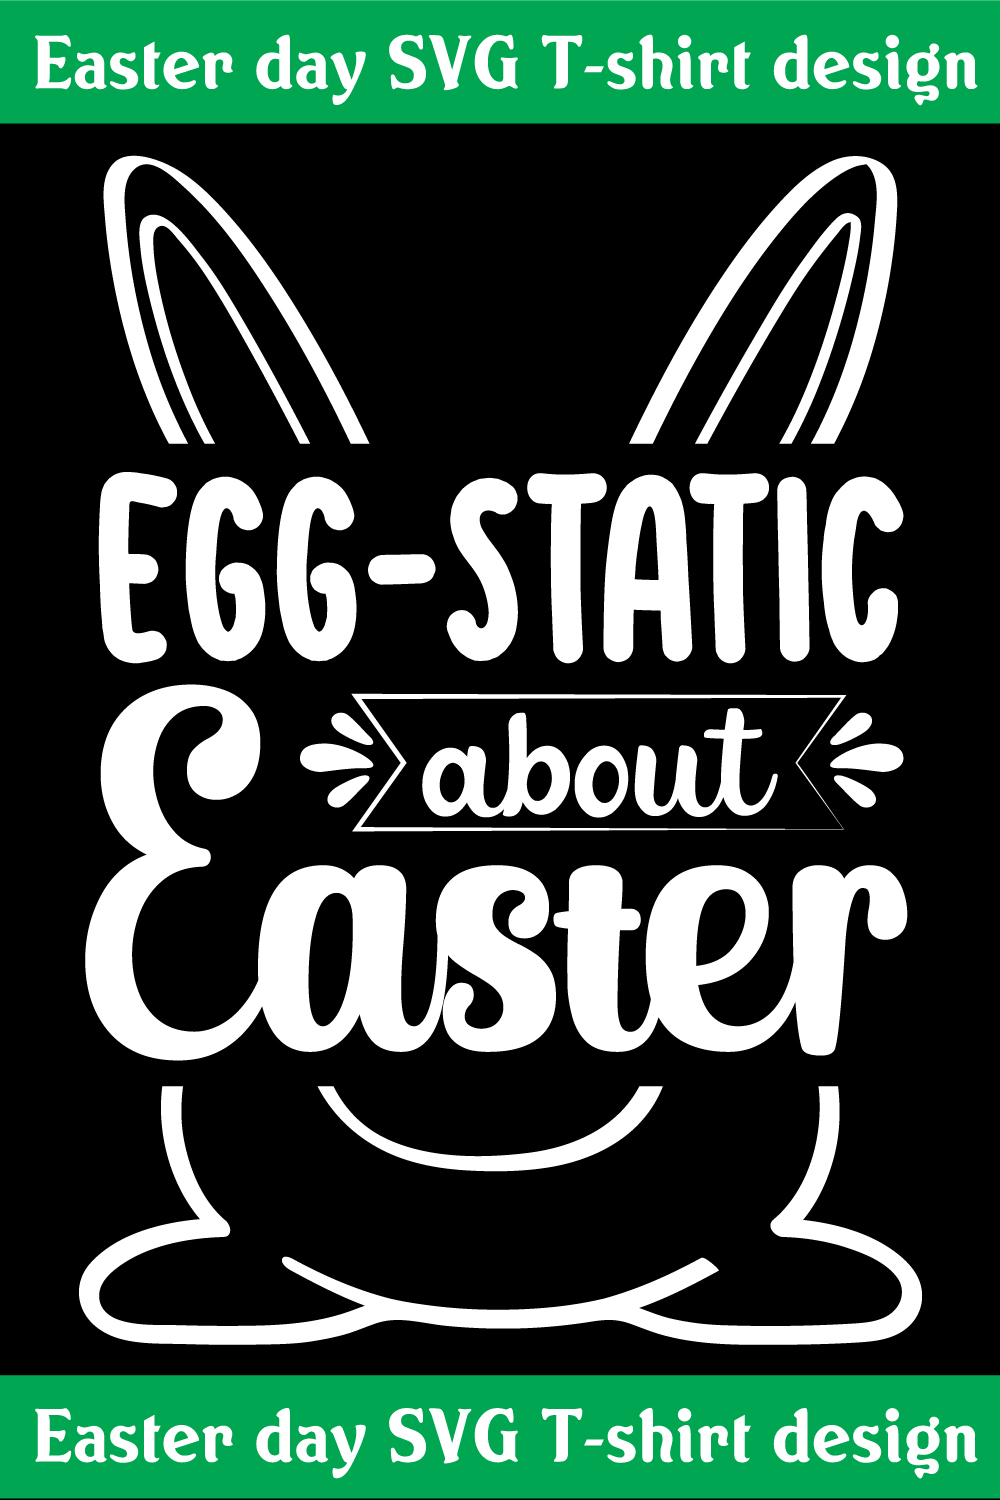 Egg static about Easter T-shirt design pinterest preview image.